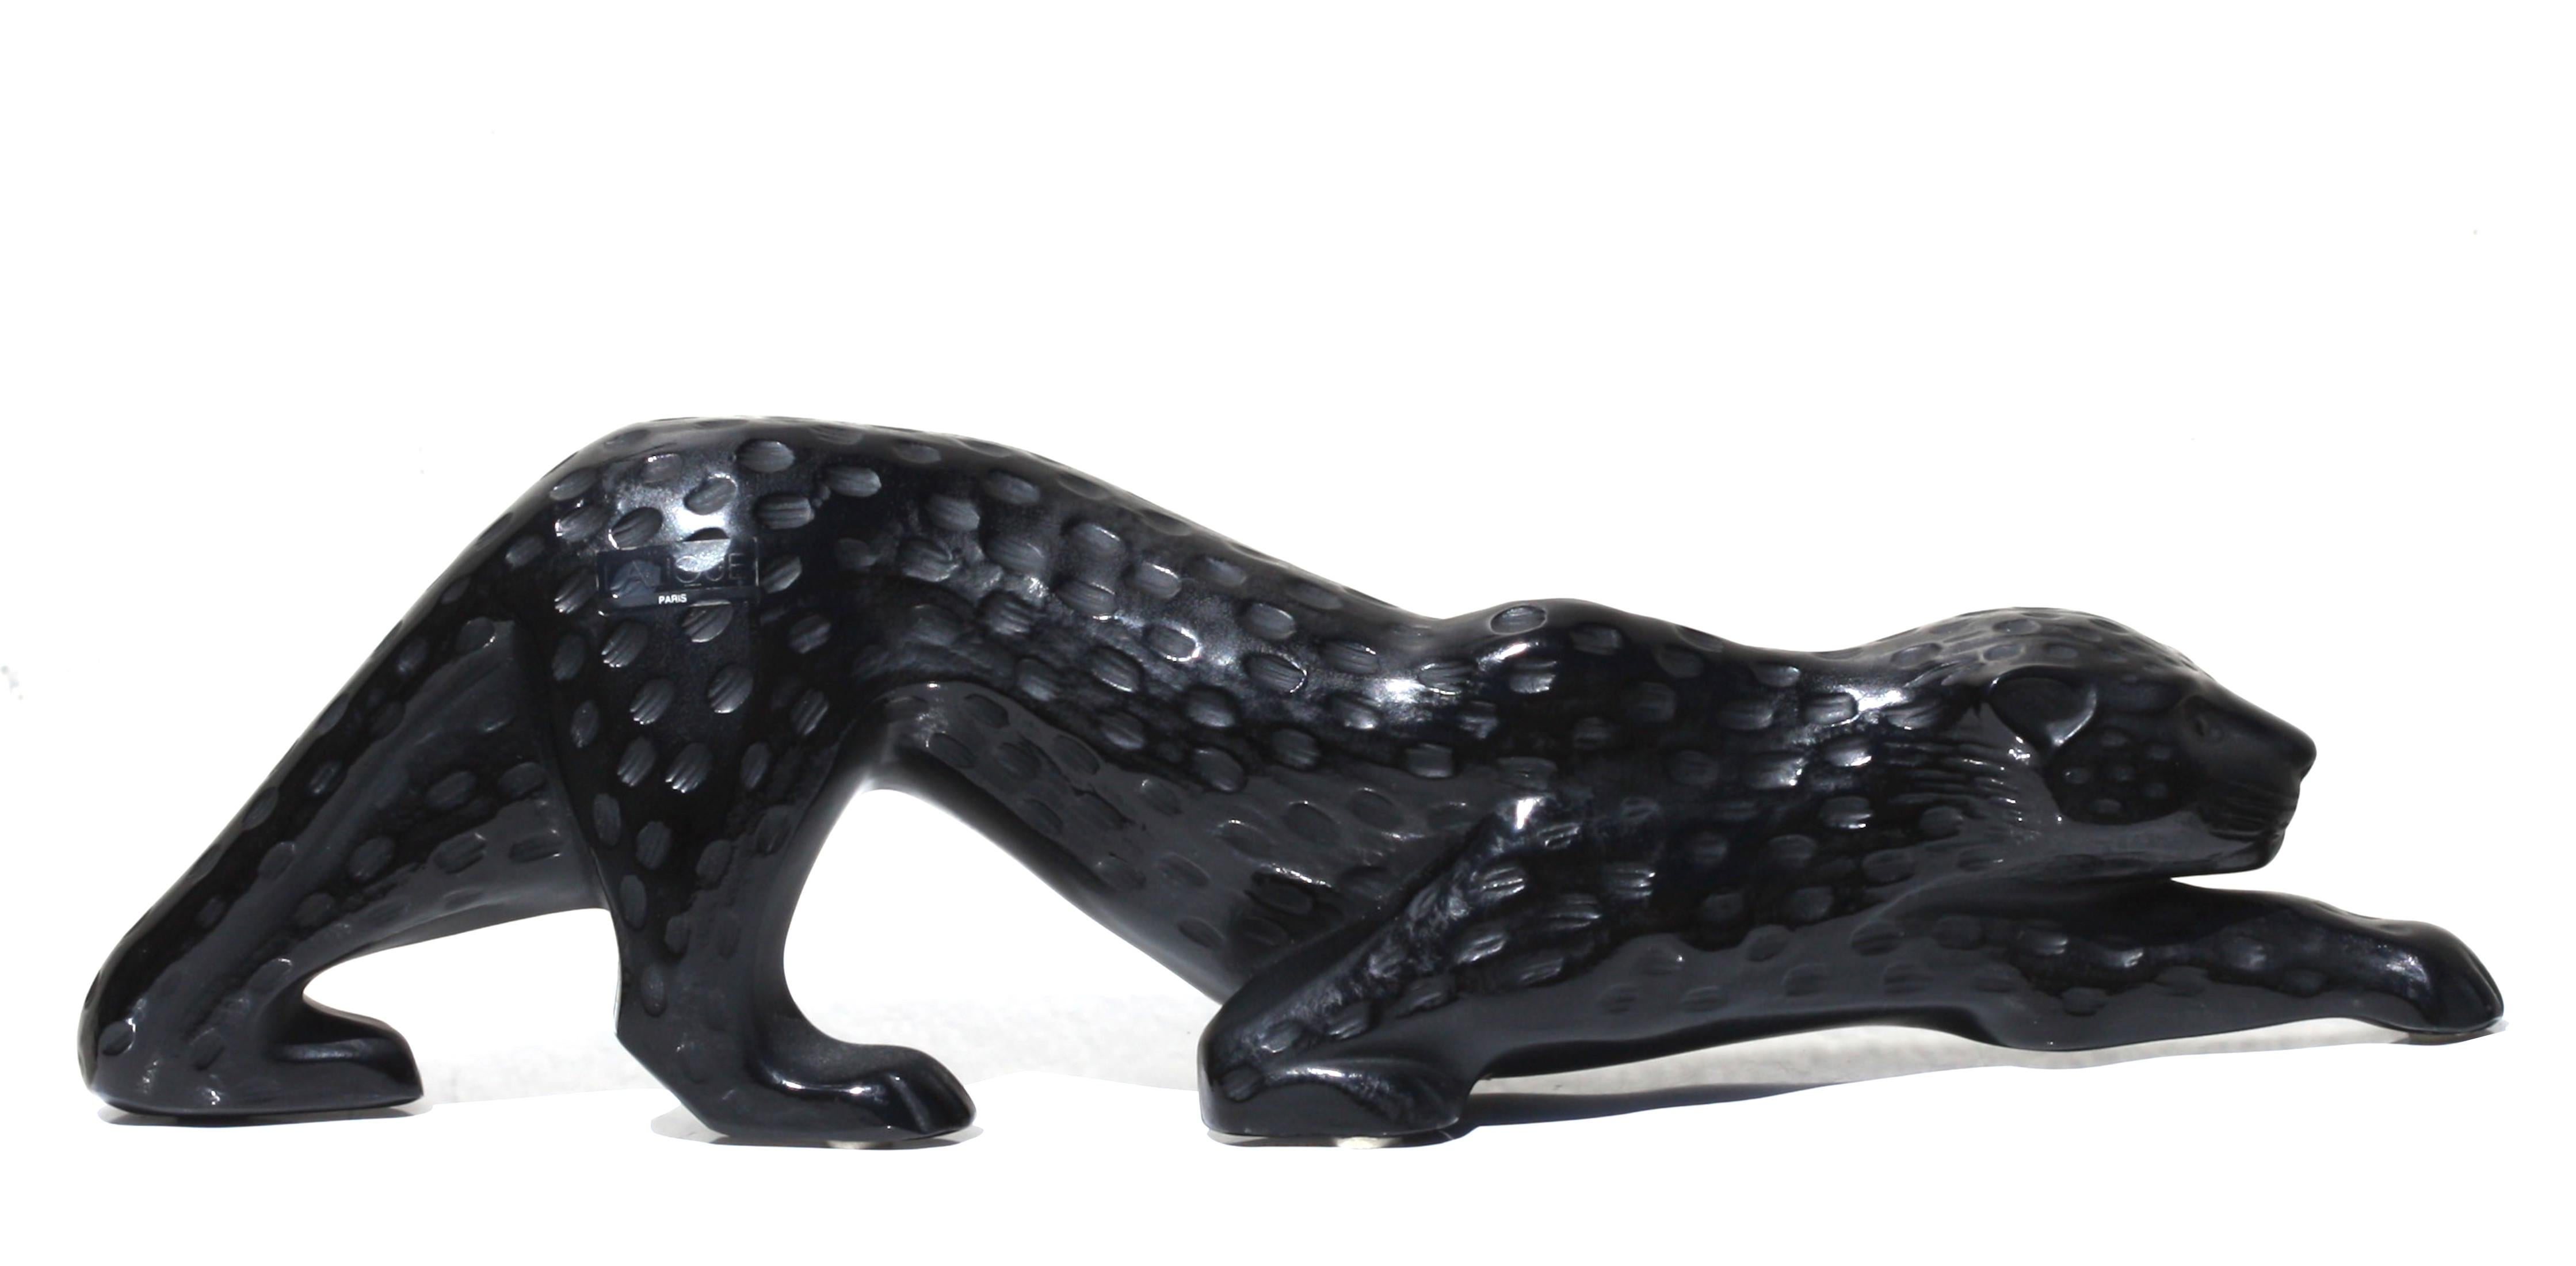 A Lalique black crystal figure of a panther, zeila
France, 20th Century
engraved Lalique France script marks, Lalique France
Length 14.5 in. (36.83 cm.).
 